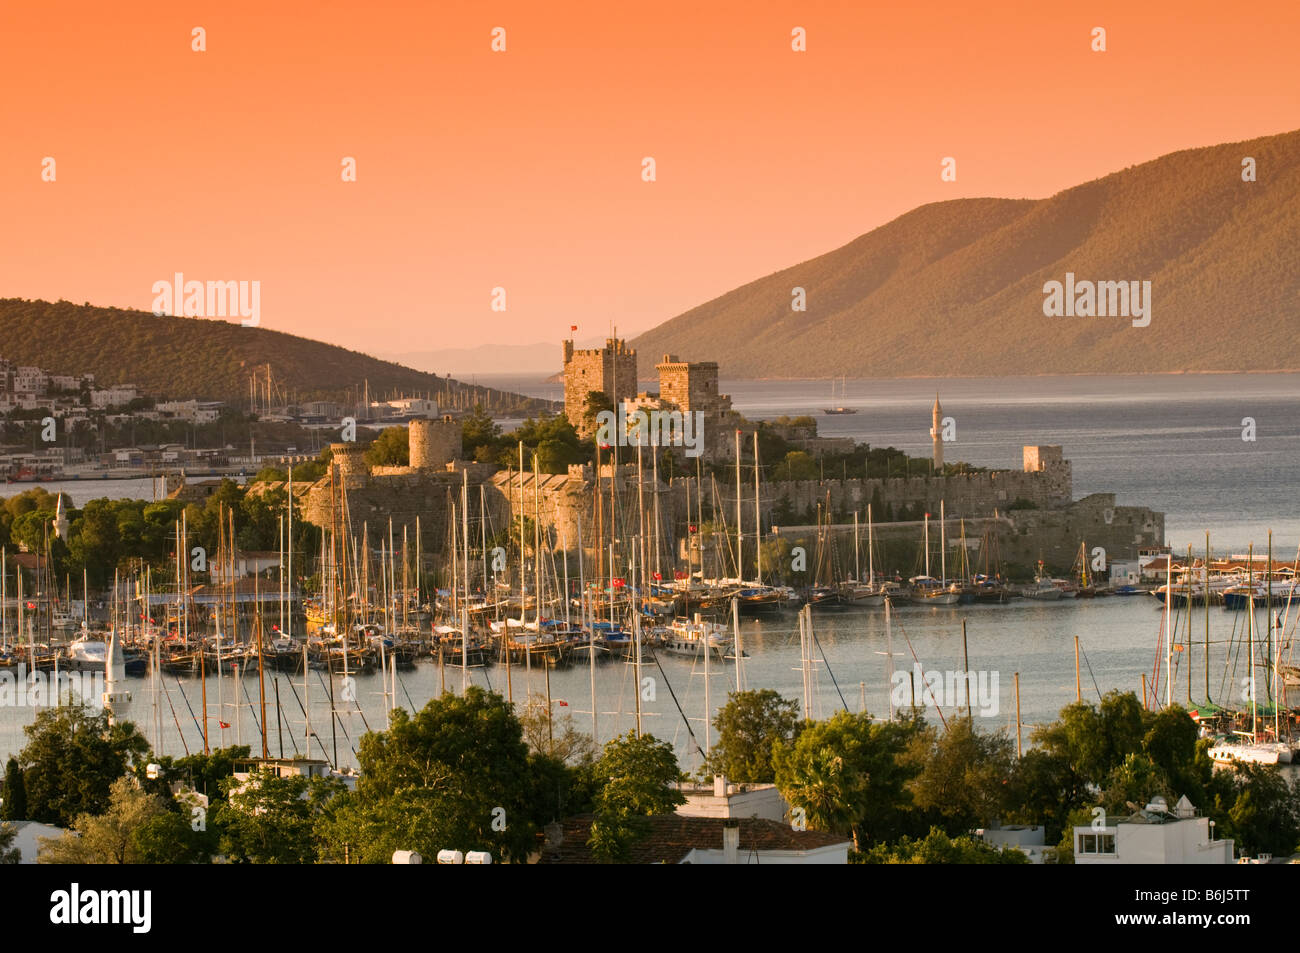 Scenic view of Bodrum harbor and castle Turkey Stock Photo